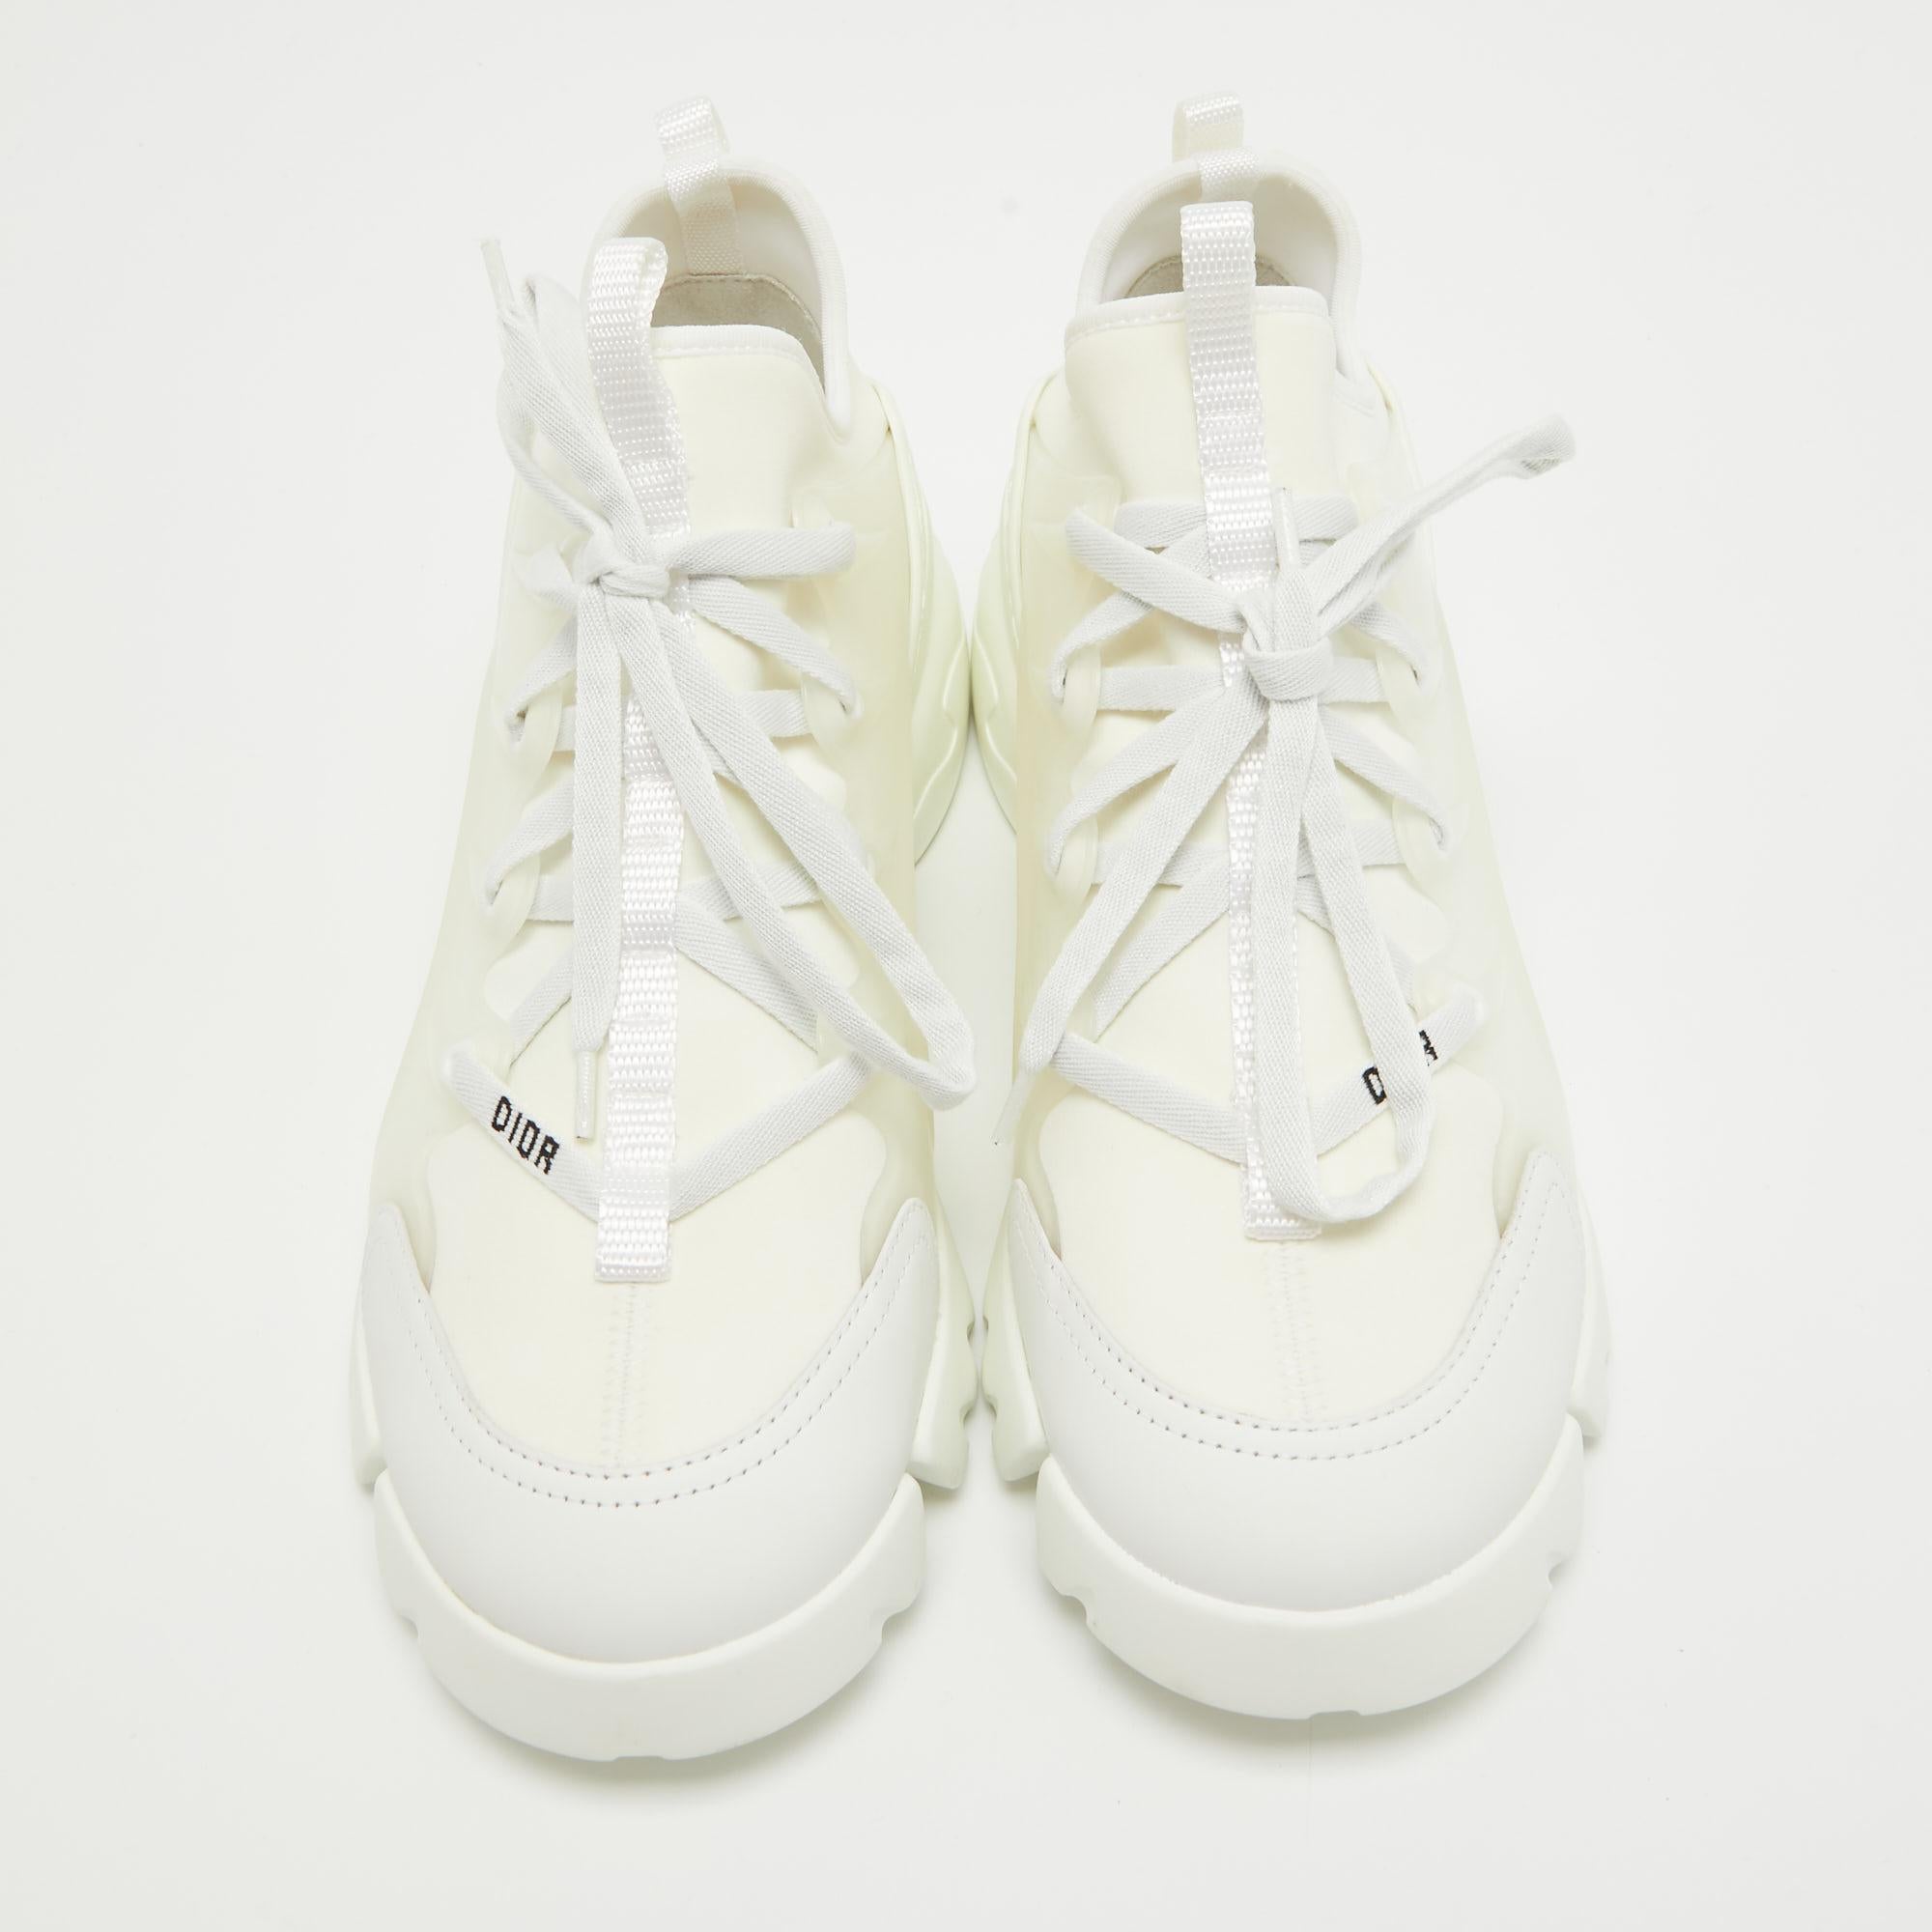 Step into fashion-forward luxury with these Dior white sneakers. These premium kicks offer a harmonious blend of style and comfort, perfect for those who demand sophistication in every step.

